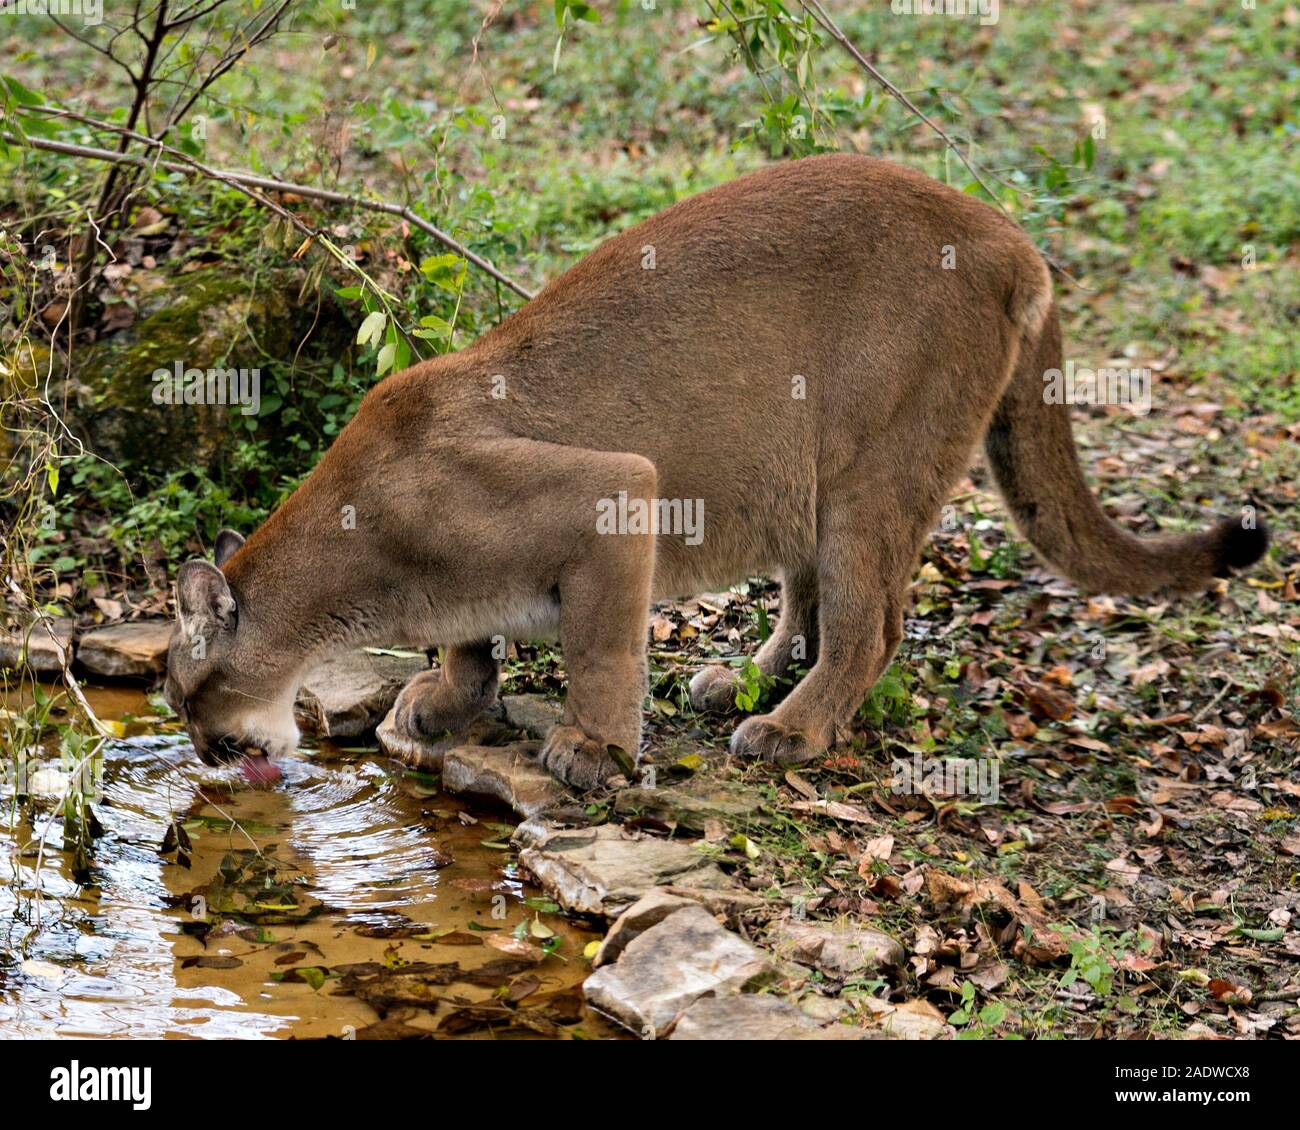 Panther Florida animal close-up profile view drinking water with a foliage background exposing its body, head, ears, eyes, nose, paws, tail. Stock Photo